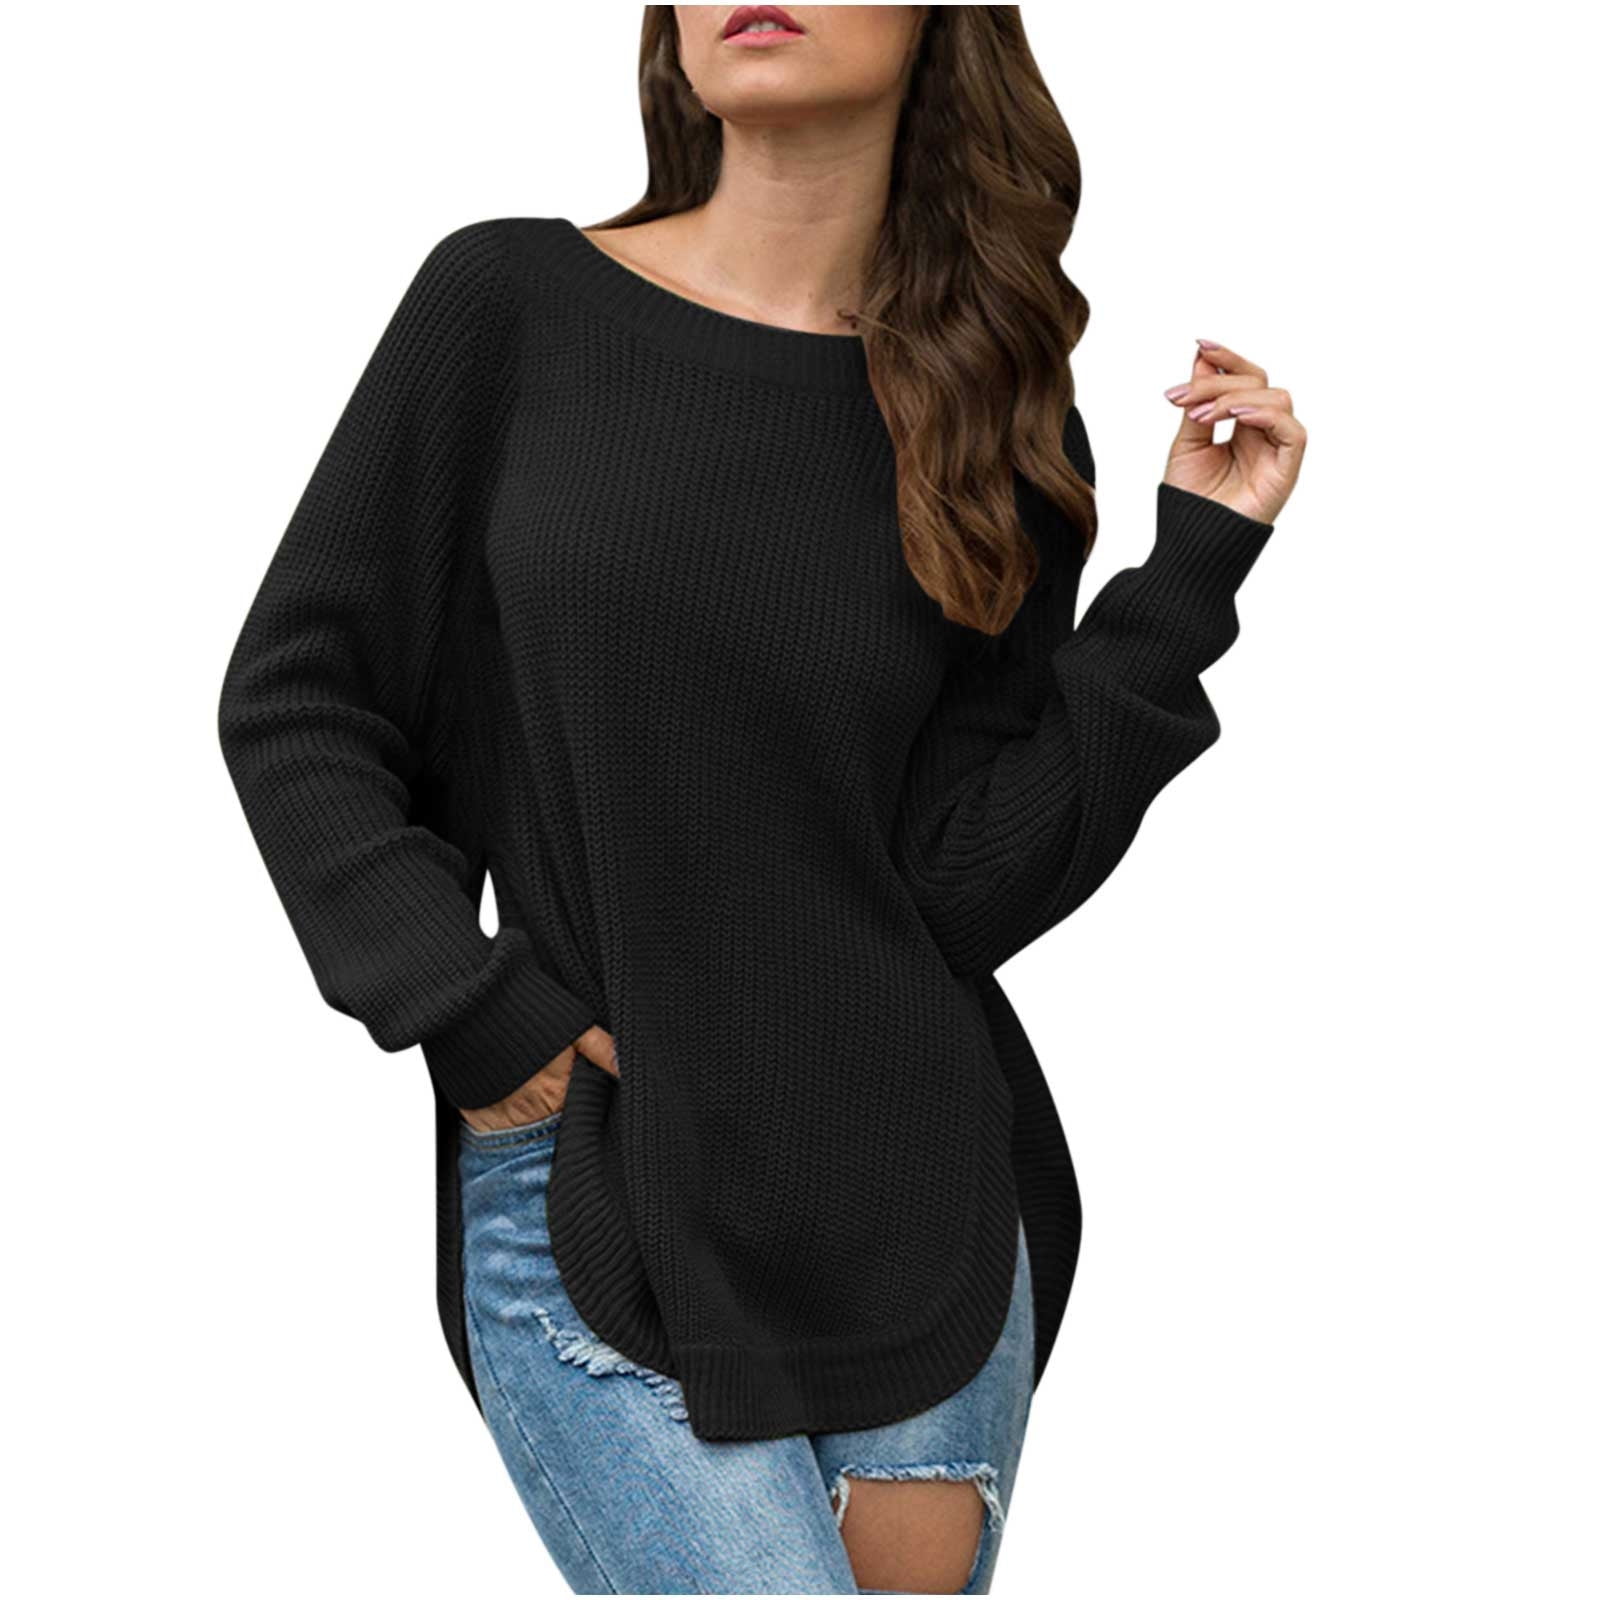 Black and Friday Deals! Umfun Pullover Sweaters for Women Round Neck ...